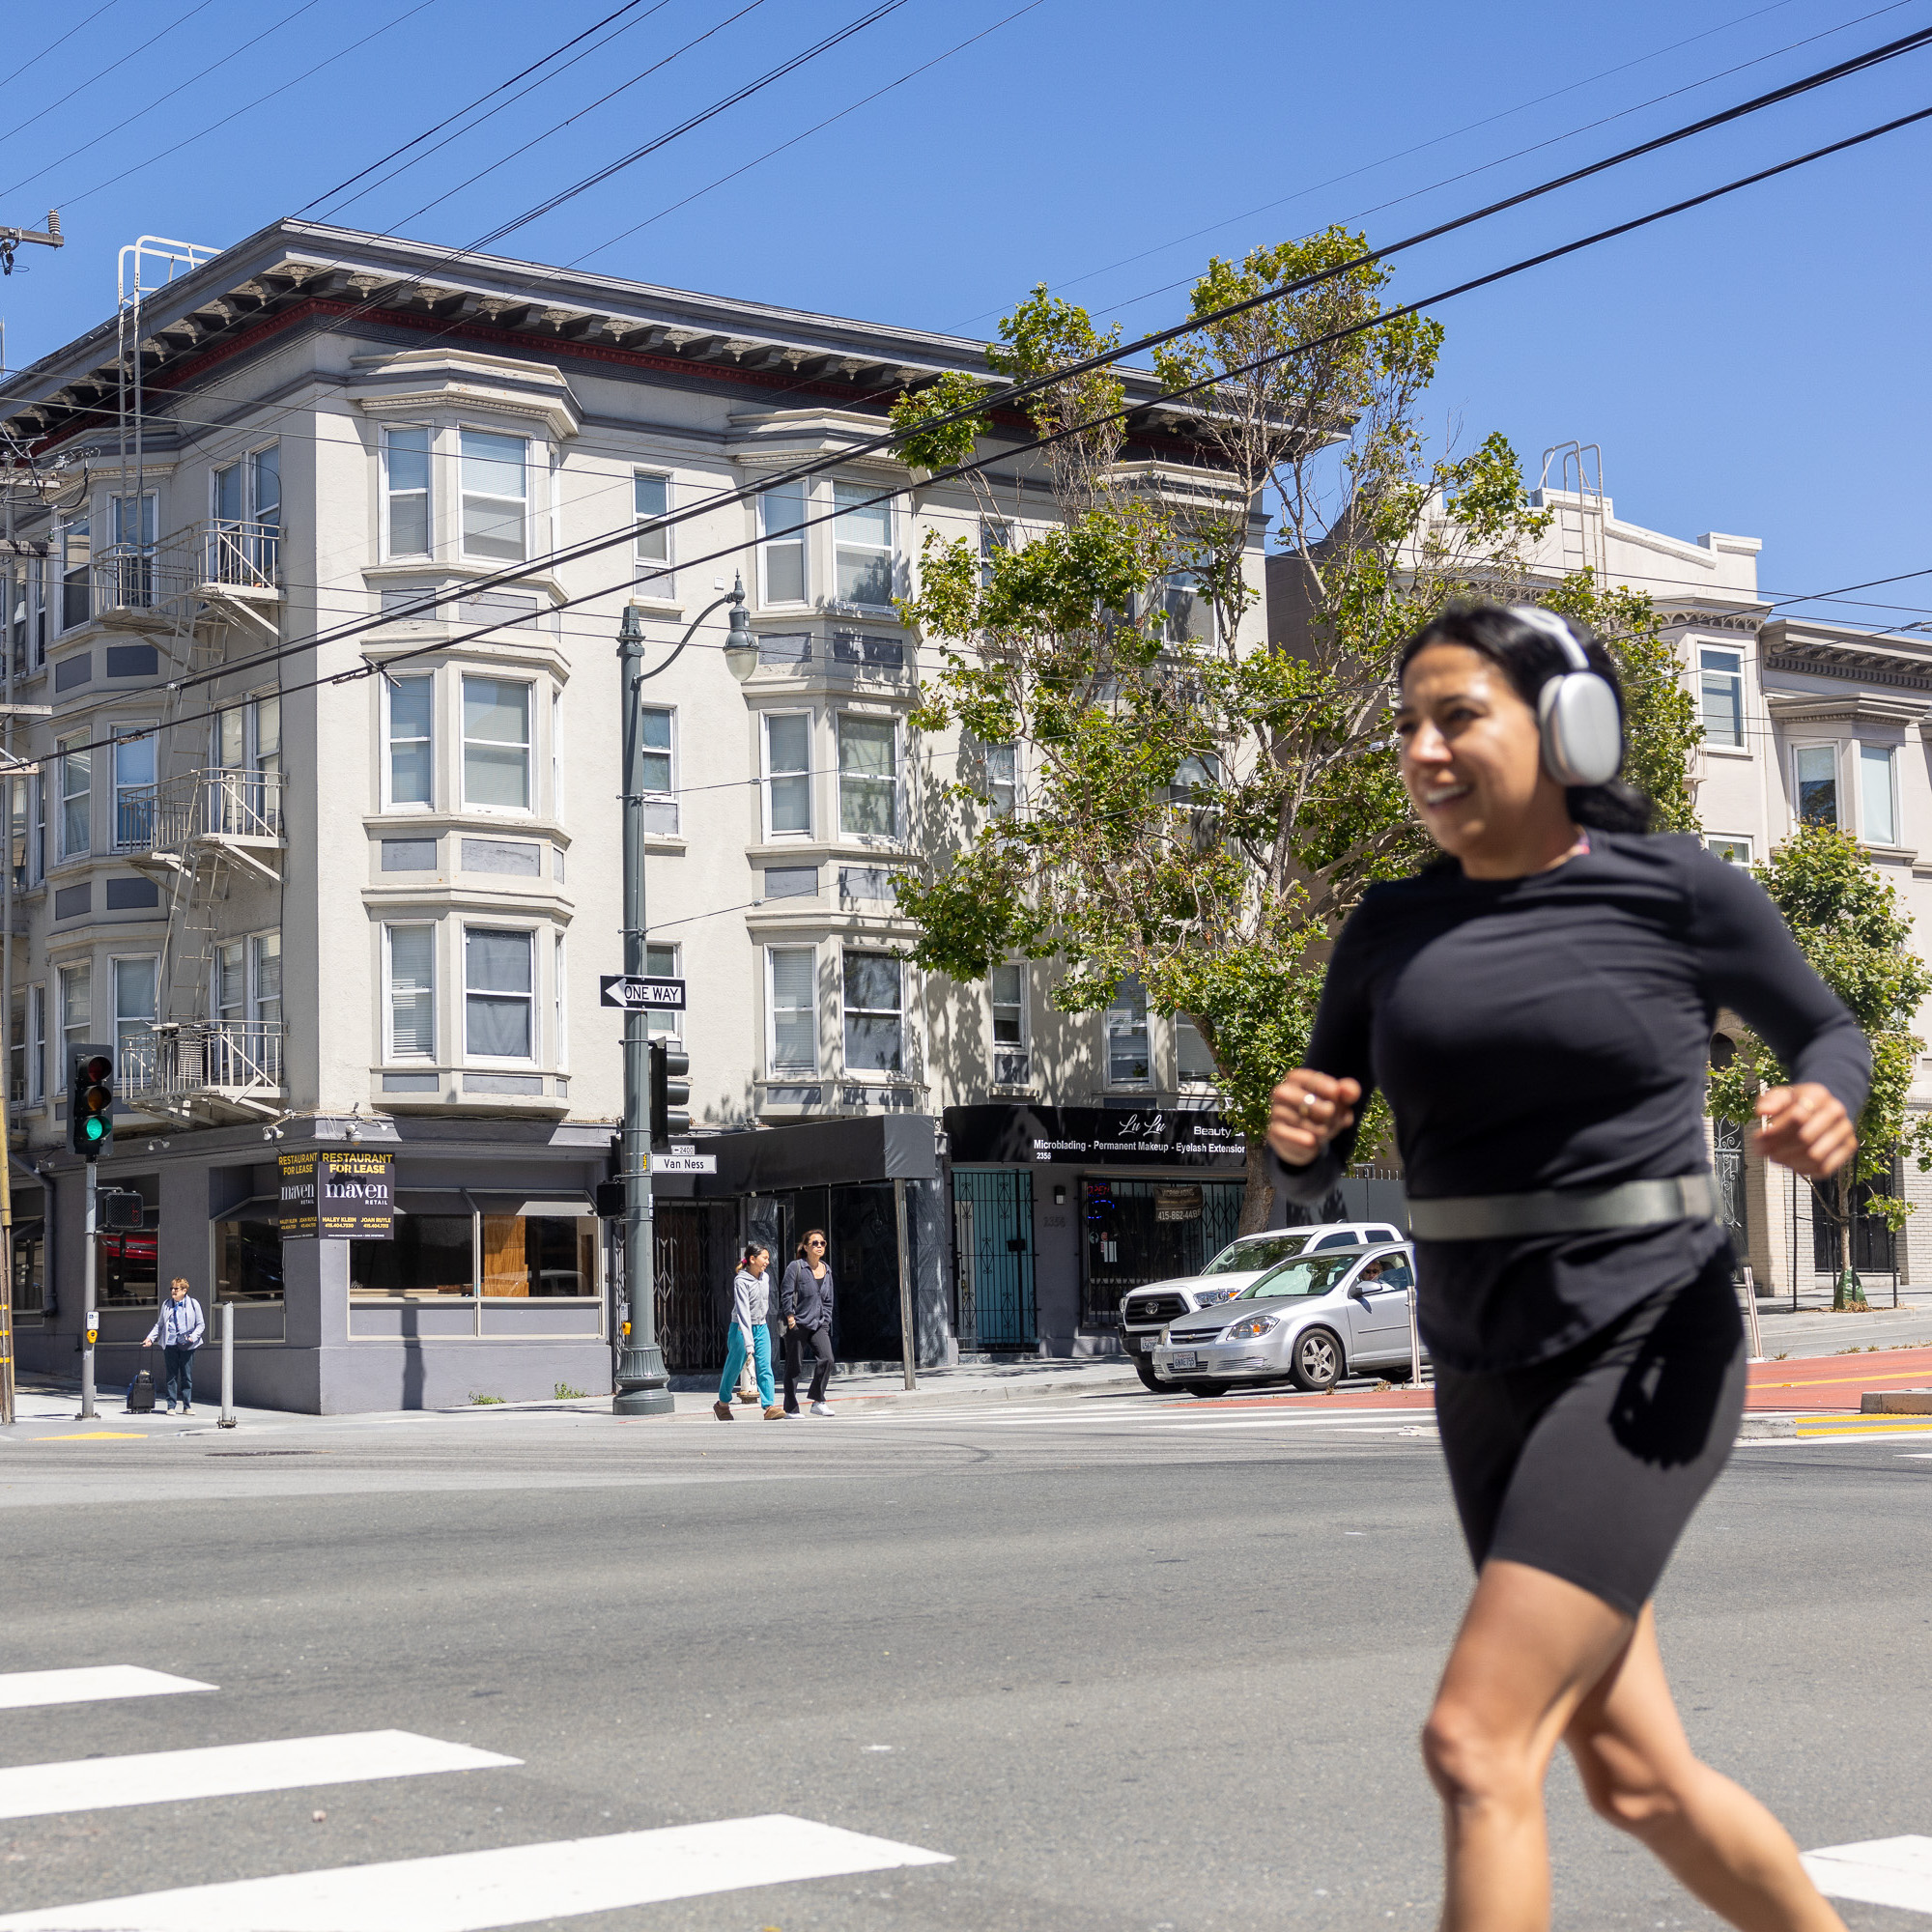 A woman with headphones jogs past a crosswalk on a sunny day, with a beige multi-story building, trees, and a few pedestrians in the background.